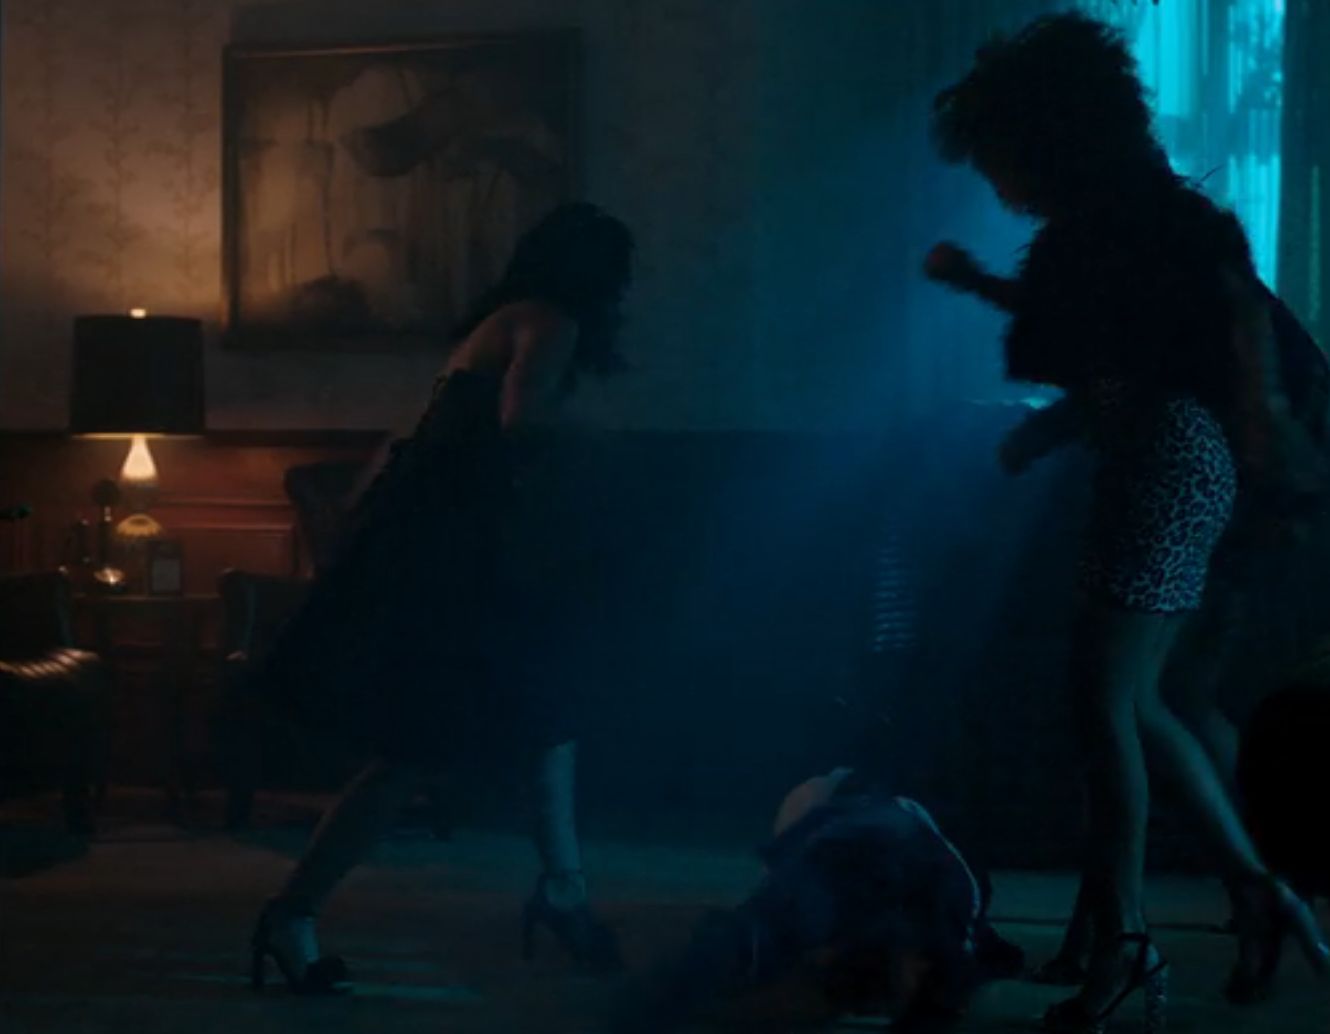 Veronica, Josie and the Pussycats beating up Nick (CW / Riverdale)